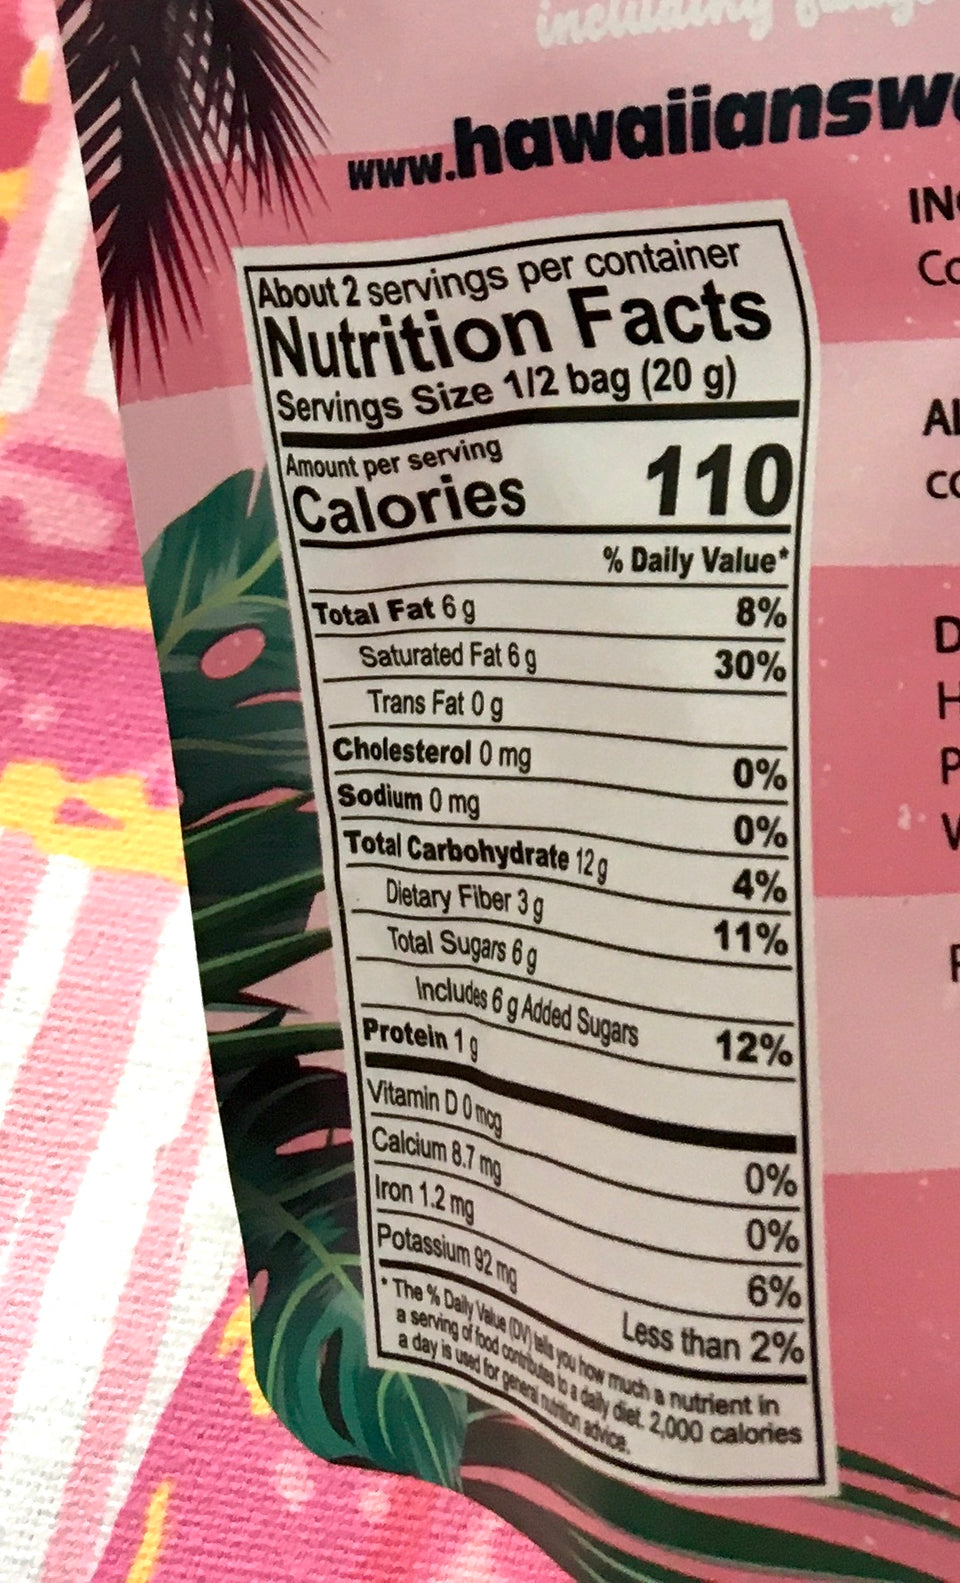 nutrition favts on back of package